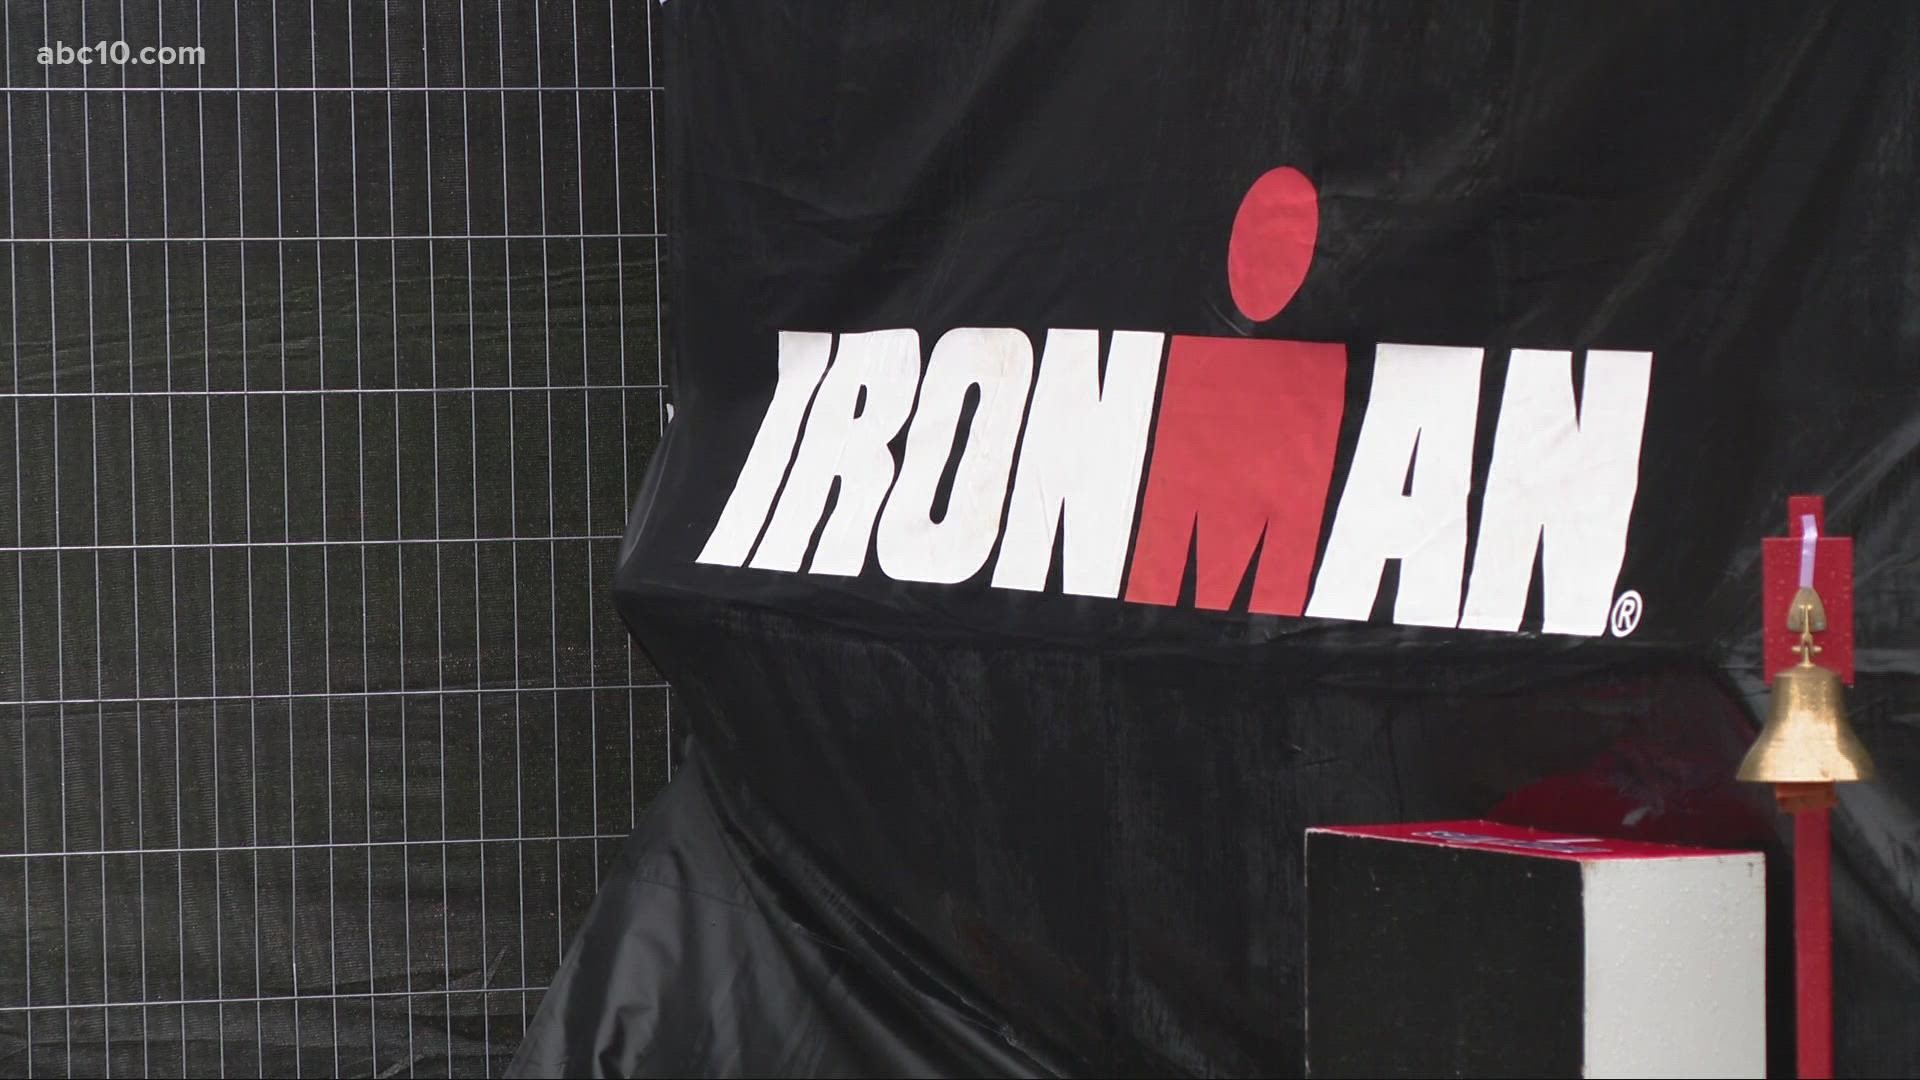 Roughly an hour before athletes were set to start racing, IRONMAN California canceled its competition in Sacramento due to this weekend's storm.